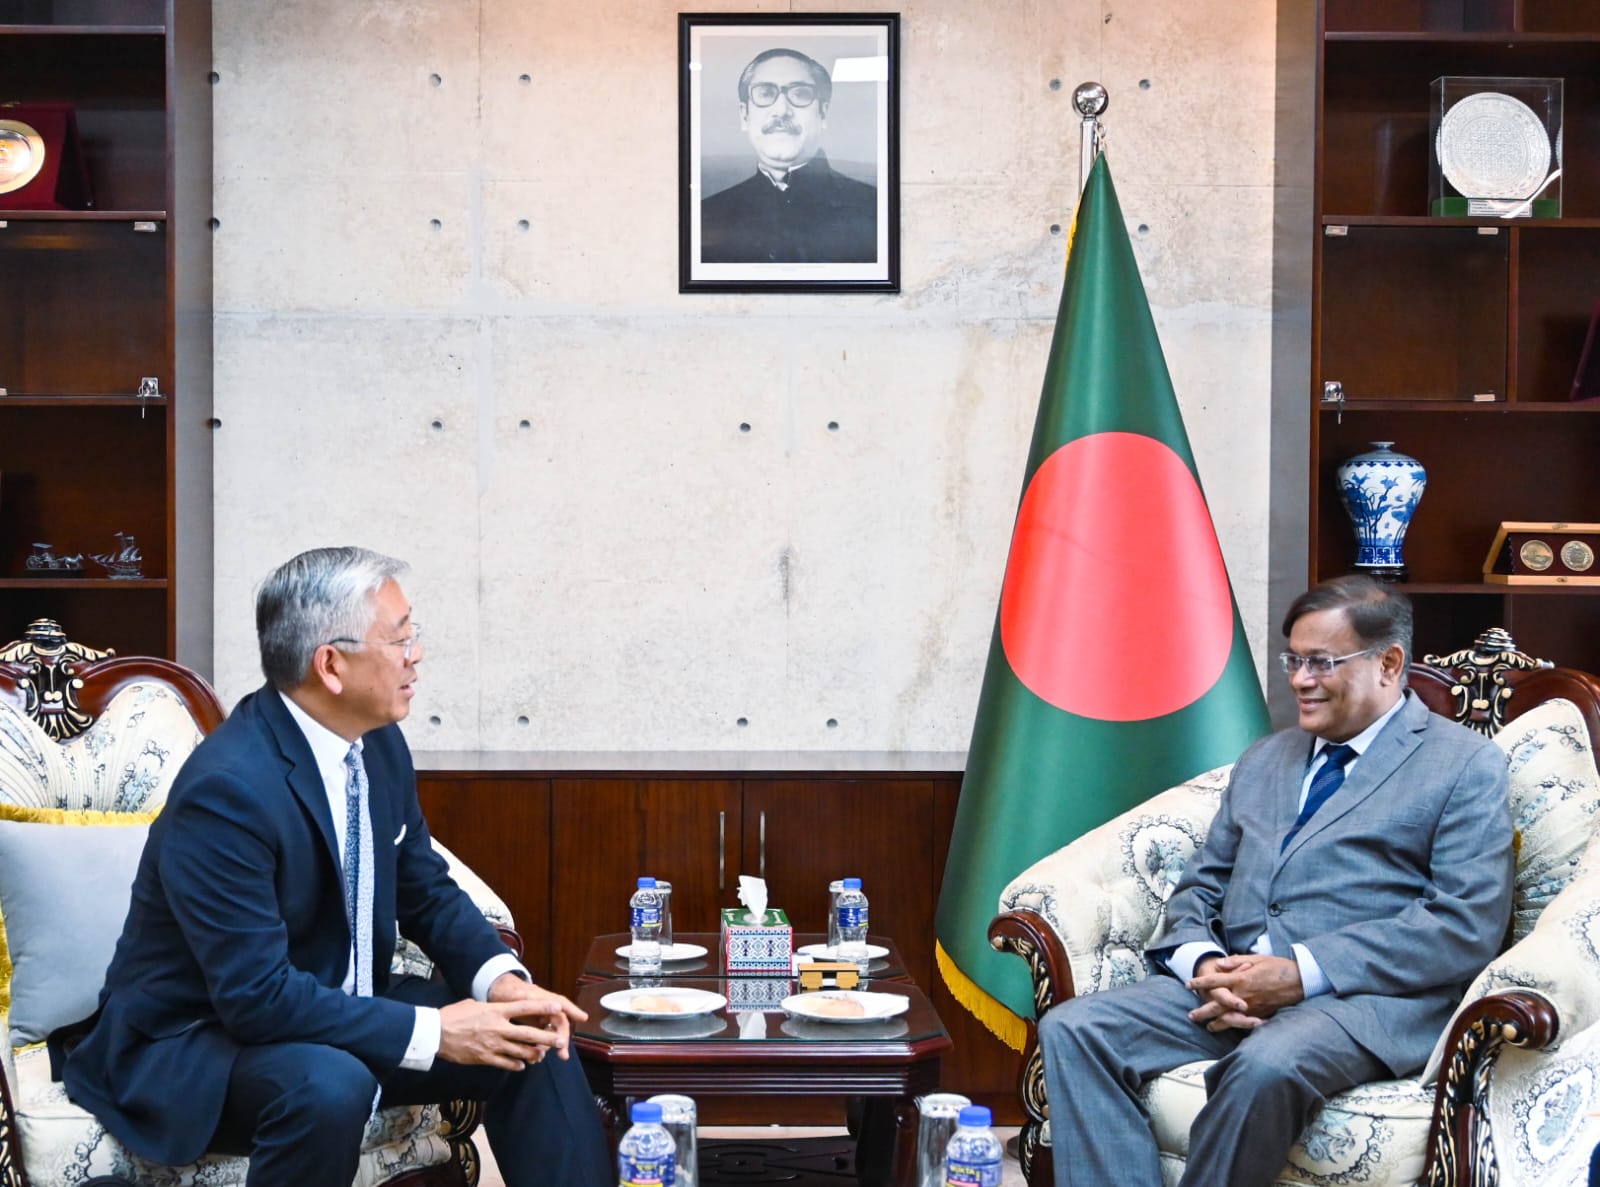 Lu meets with FM Hasan  and Environment Minister Saber